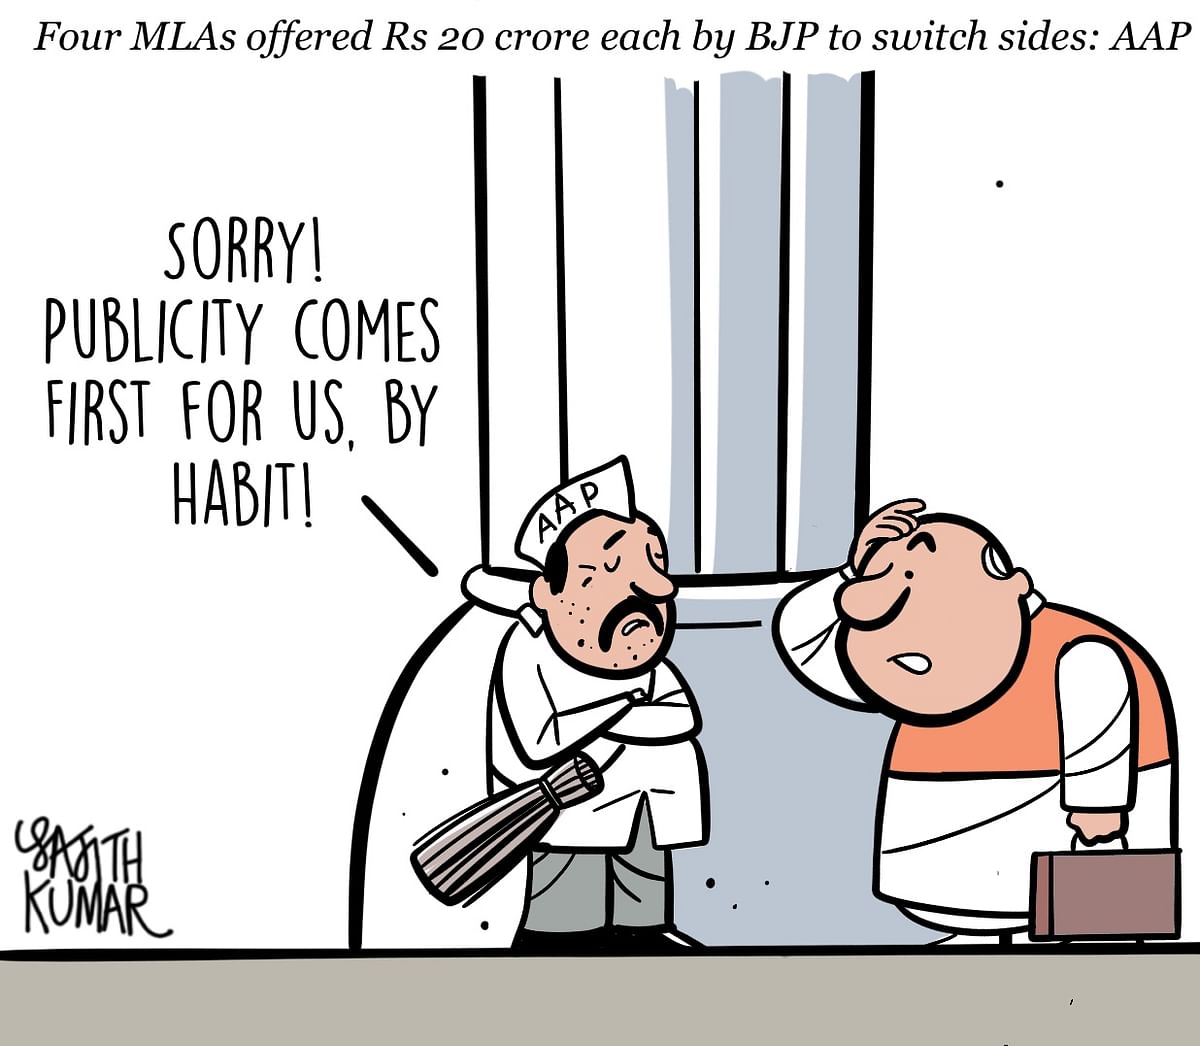 DH Toon | 'Publicity comes first for us, by habit!'